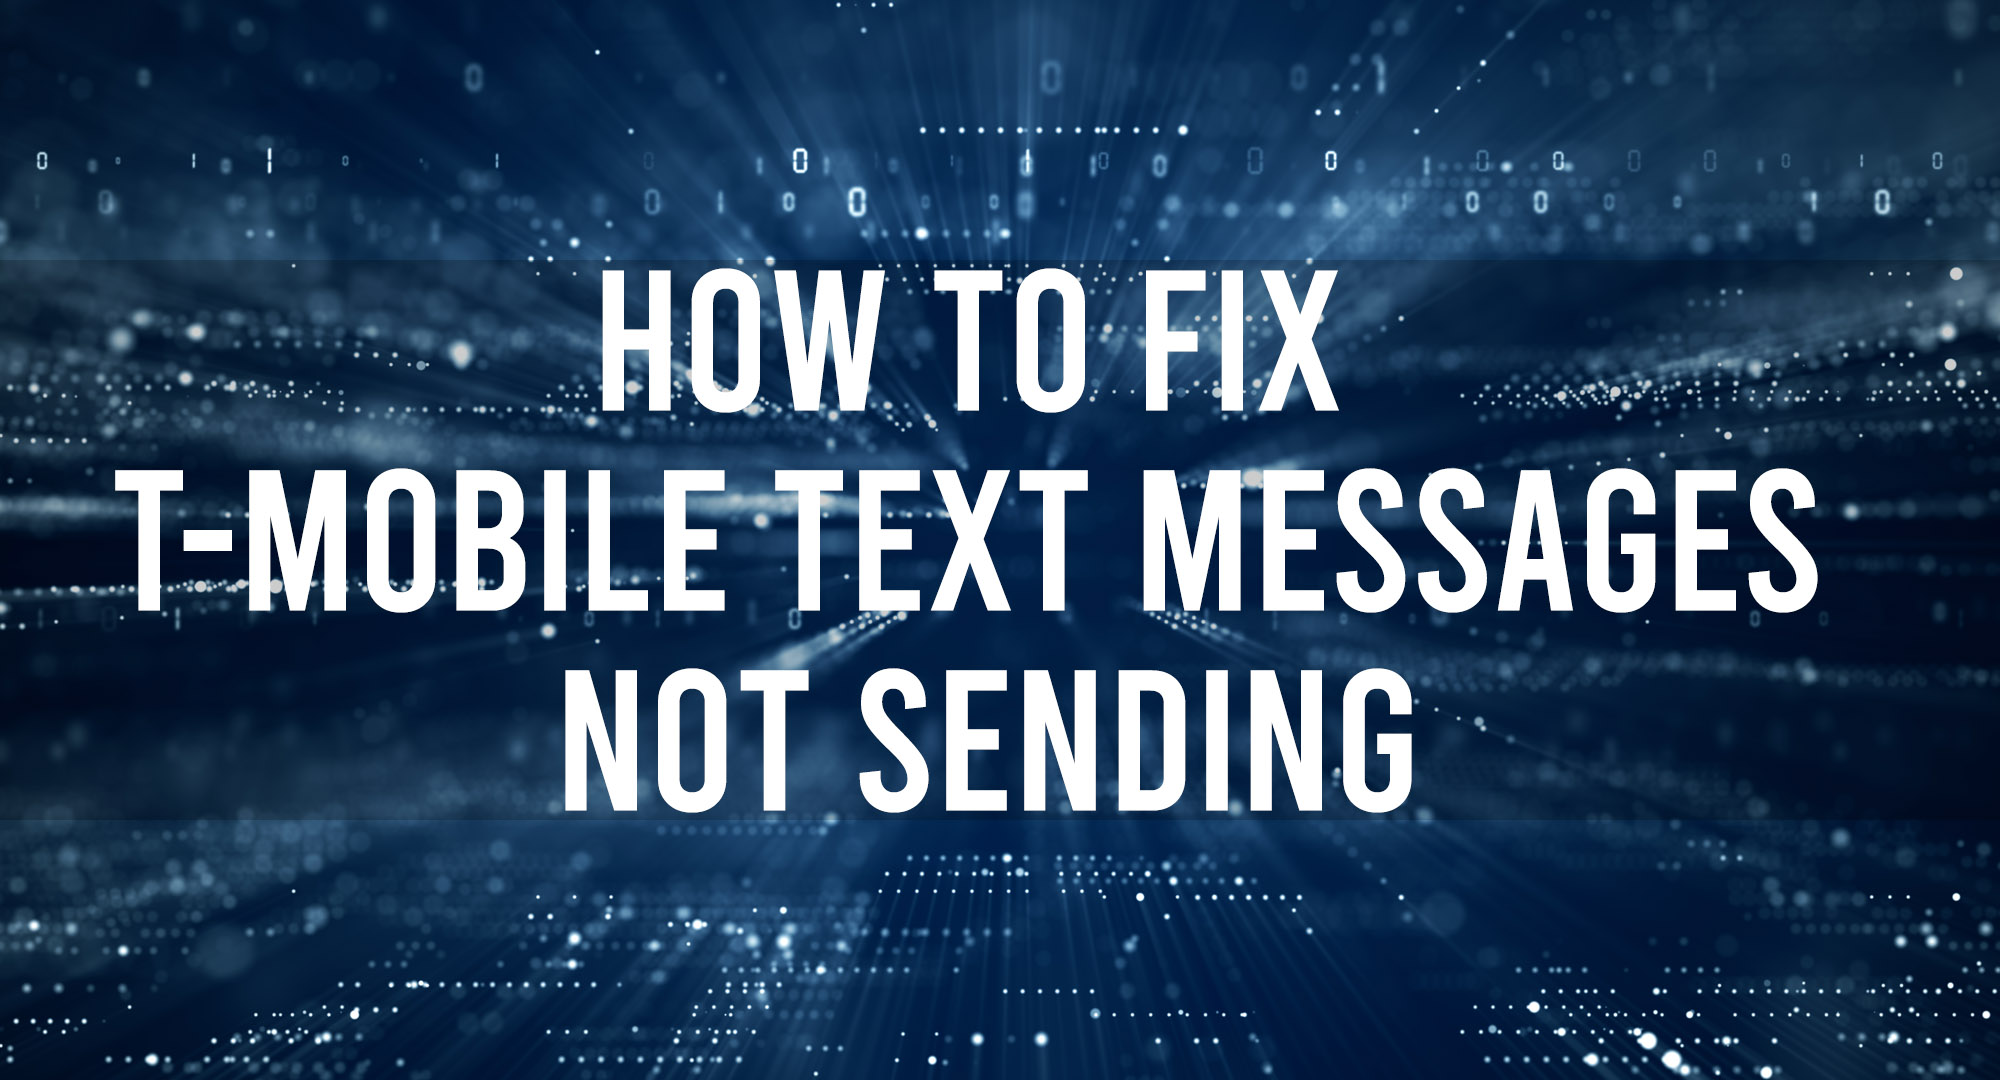 How to Fix T-Mobile Text Messages Not Sending